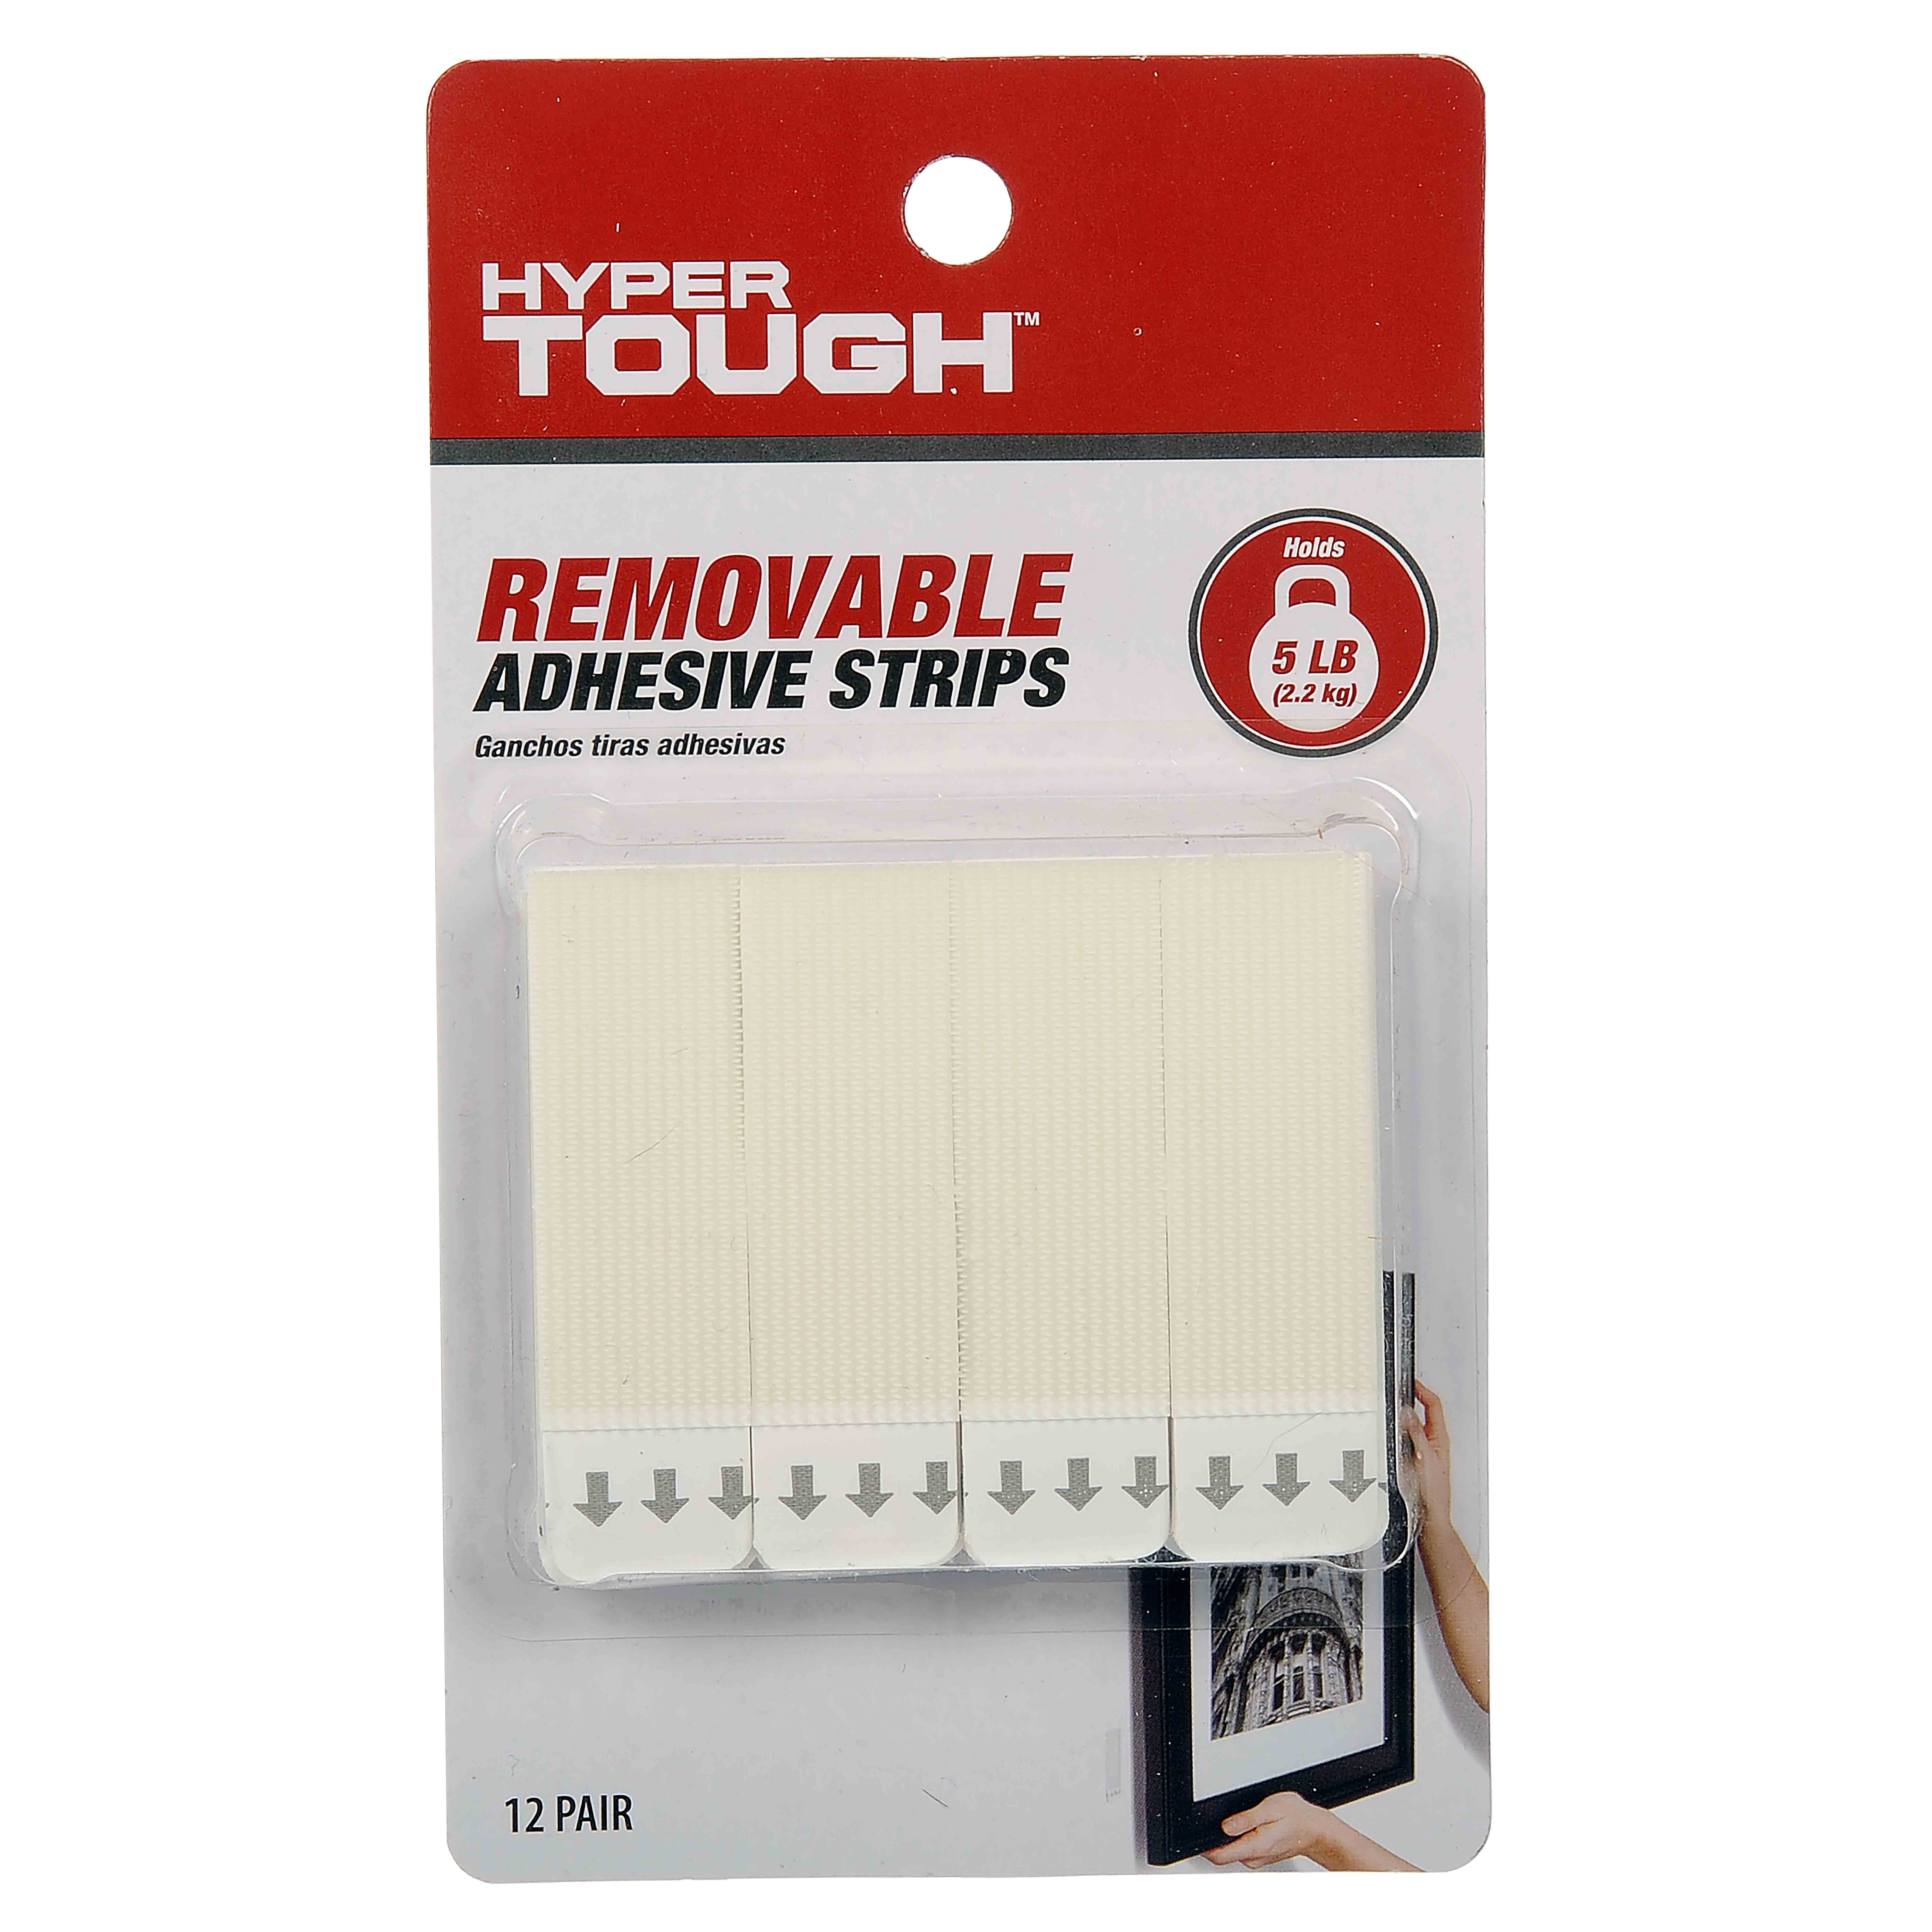 Hyper Tough Removable Adhesive Strips, Large, Holds up to 5 lb., 12 Pair, White - image 1 of 8